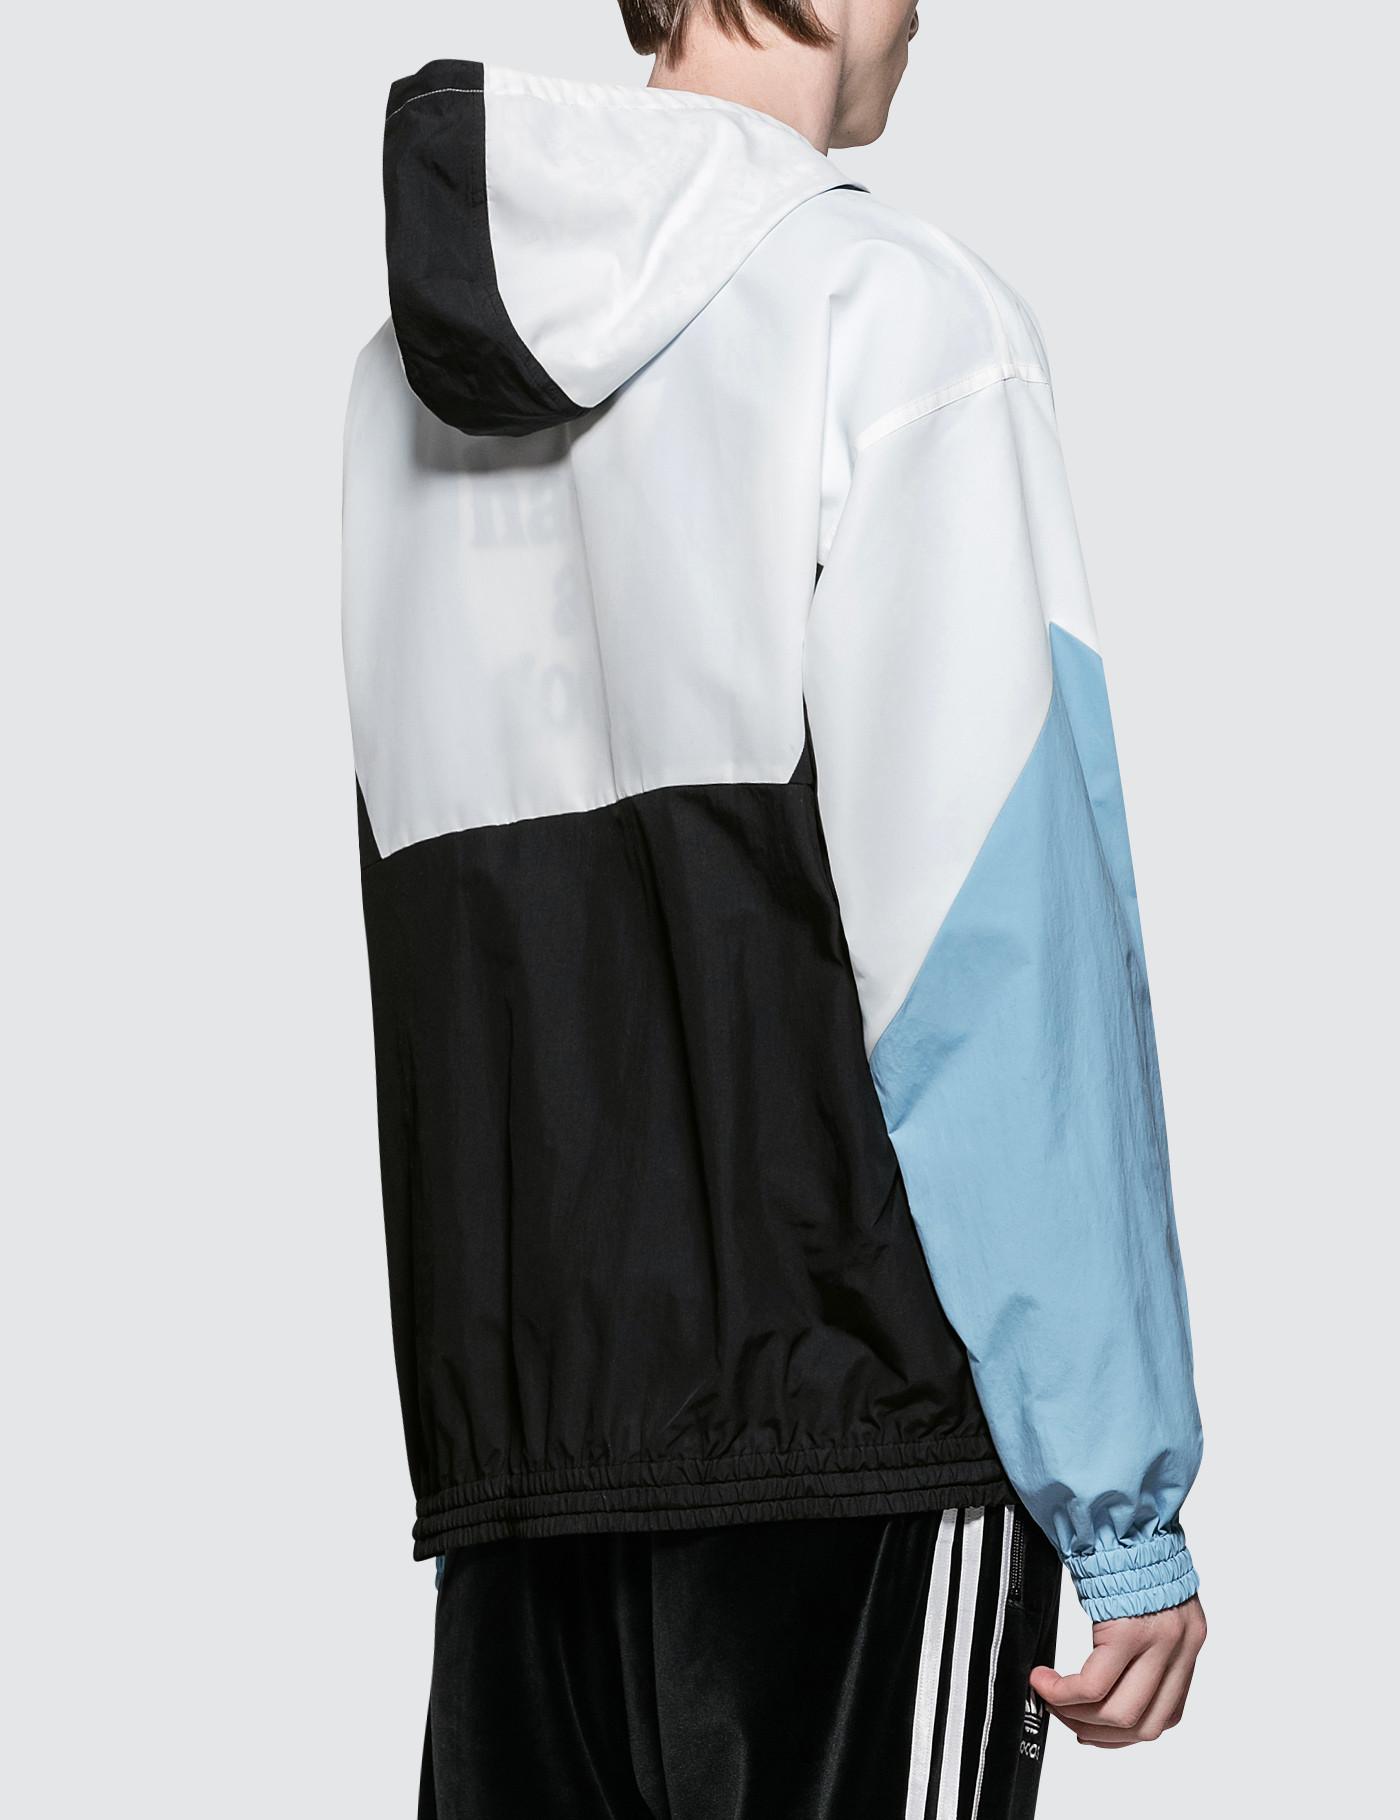 adidas have a good time pullover